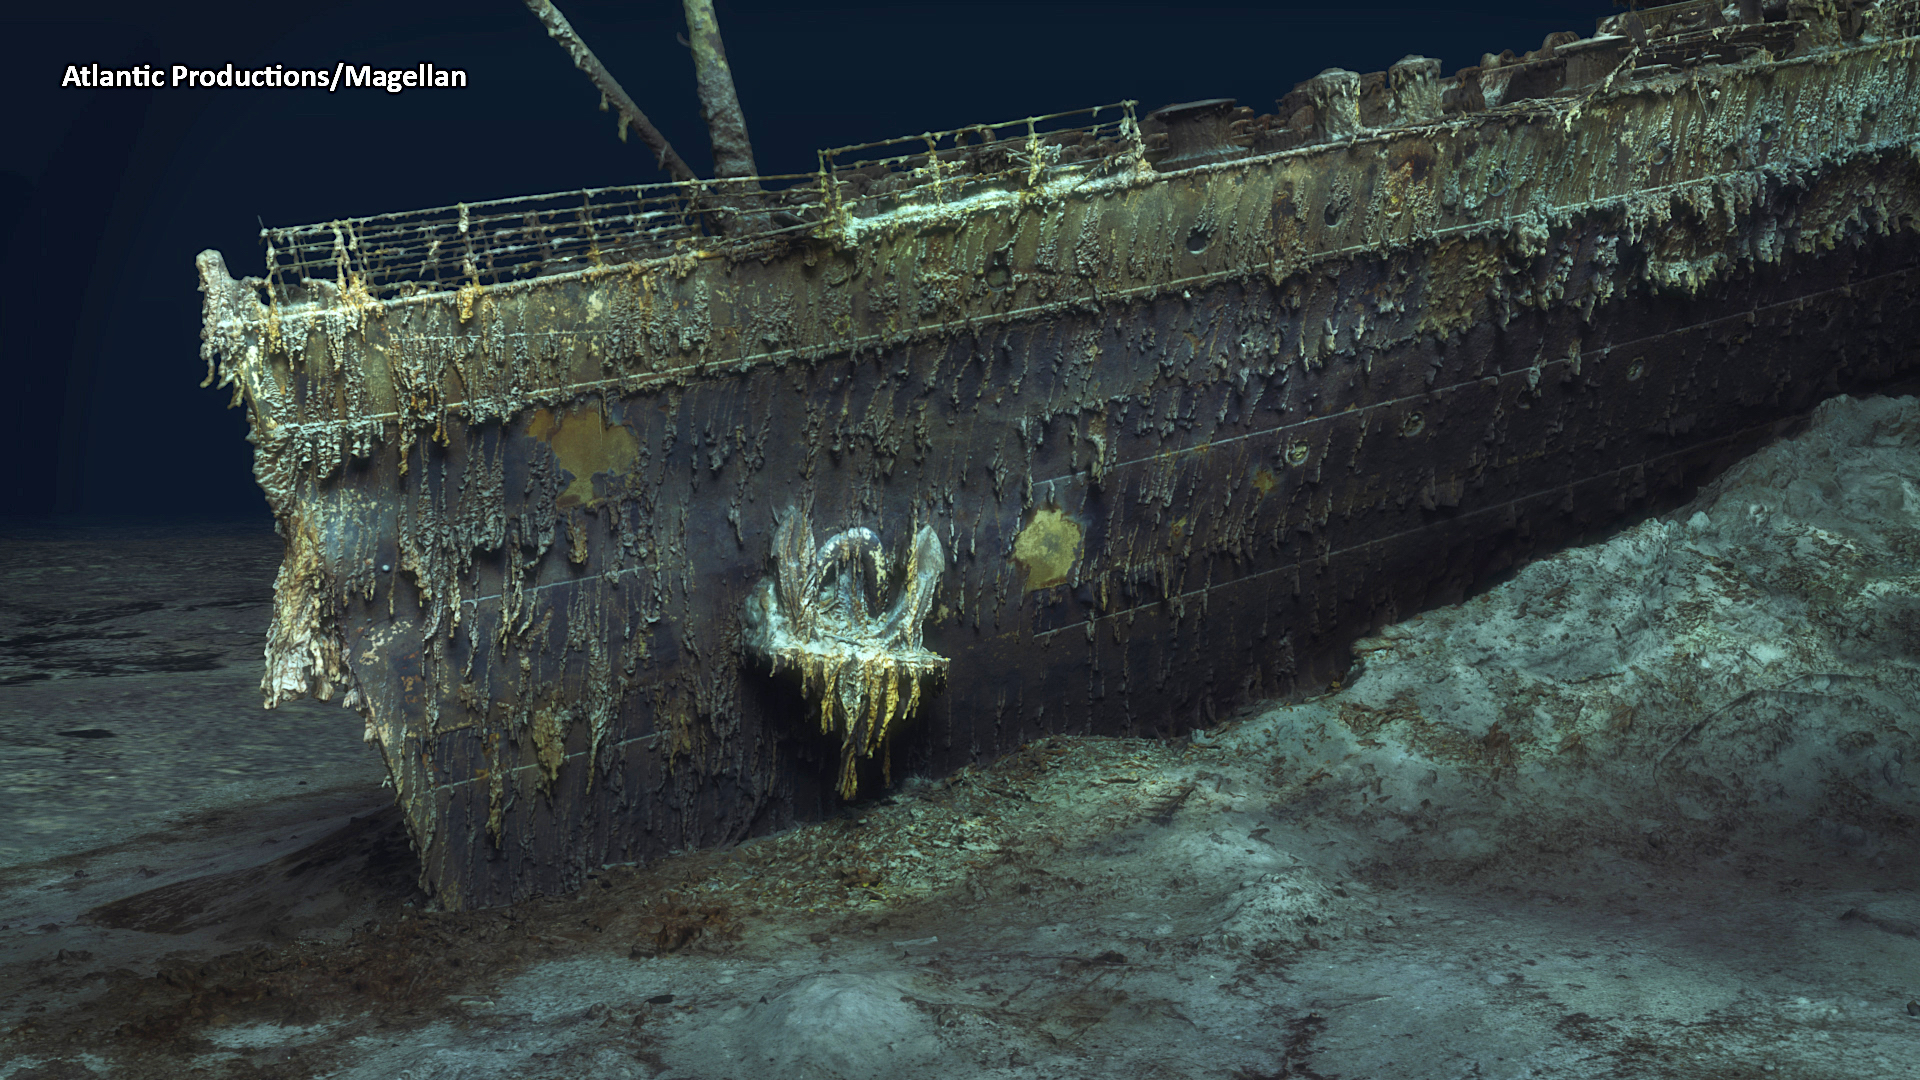 The First Full 3D Scan of the Titanic, Made of More Than 700,000 Images Capturing the Wreck’s Every Detail